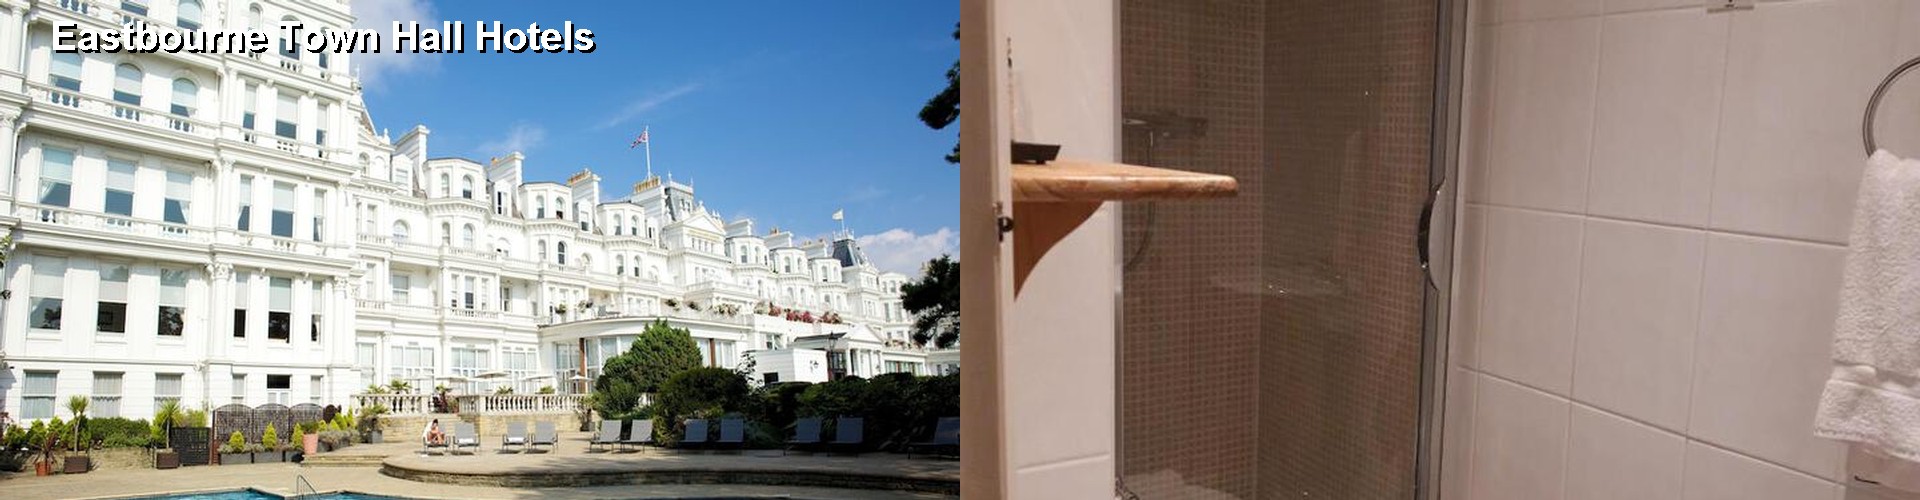 5 Best Hotels near Eastbourne Town Hall